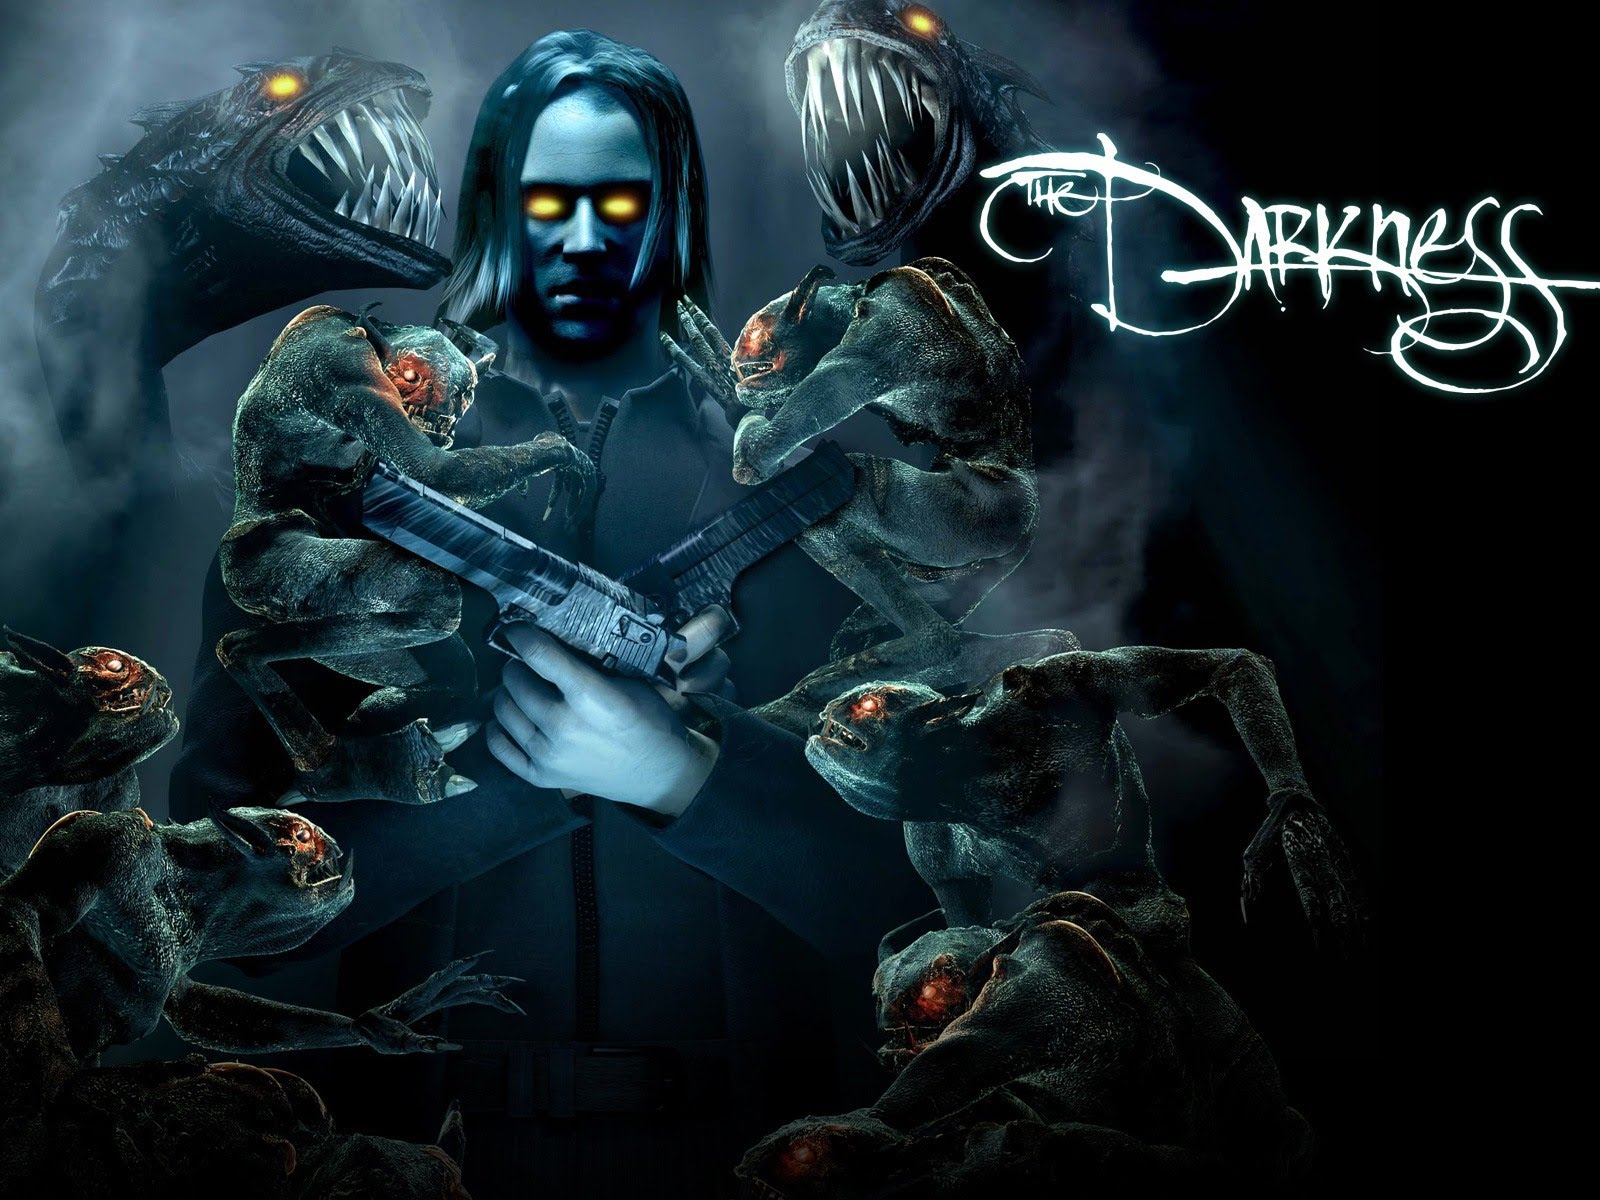 Cgrundertow The Darkness For Playstation Video Game